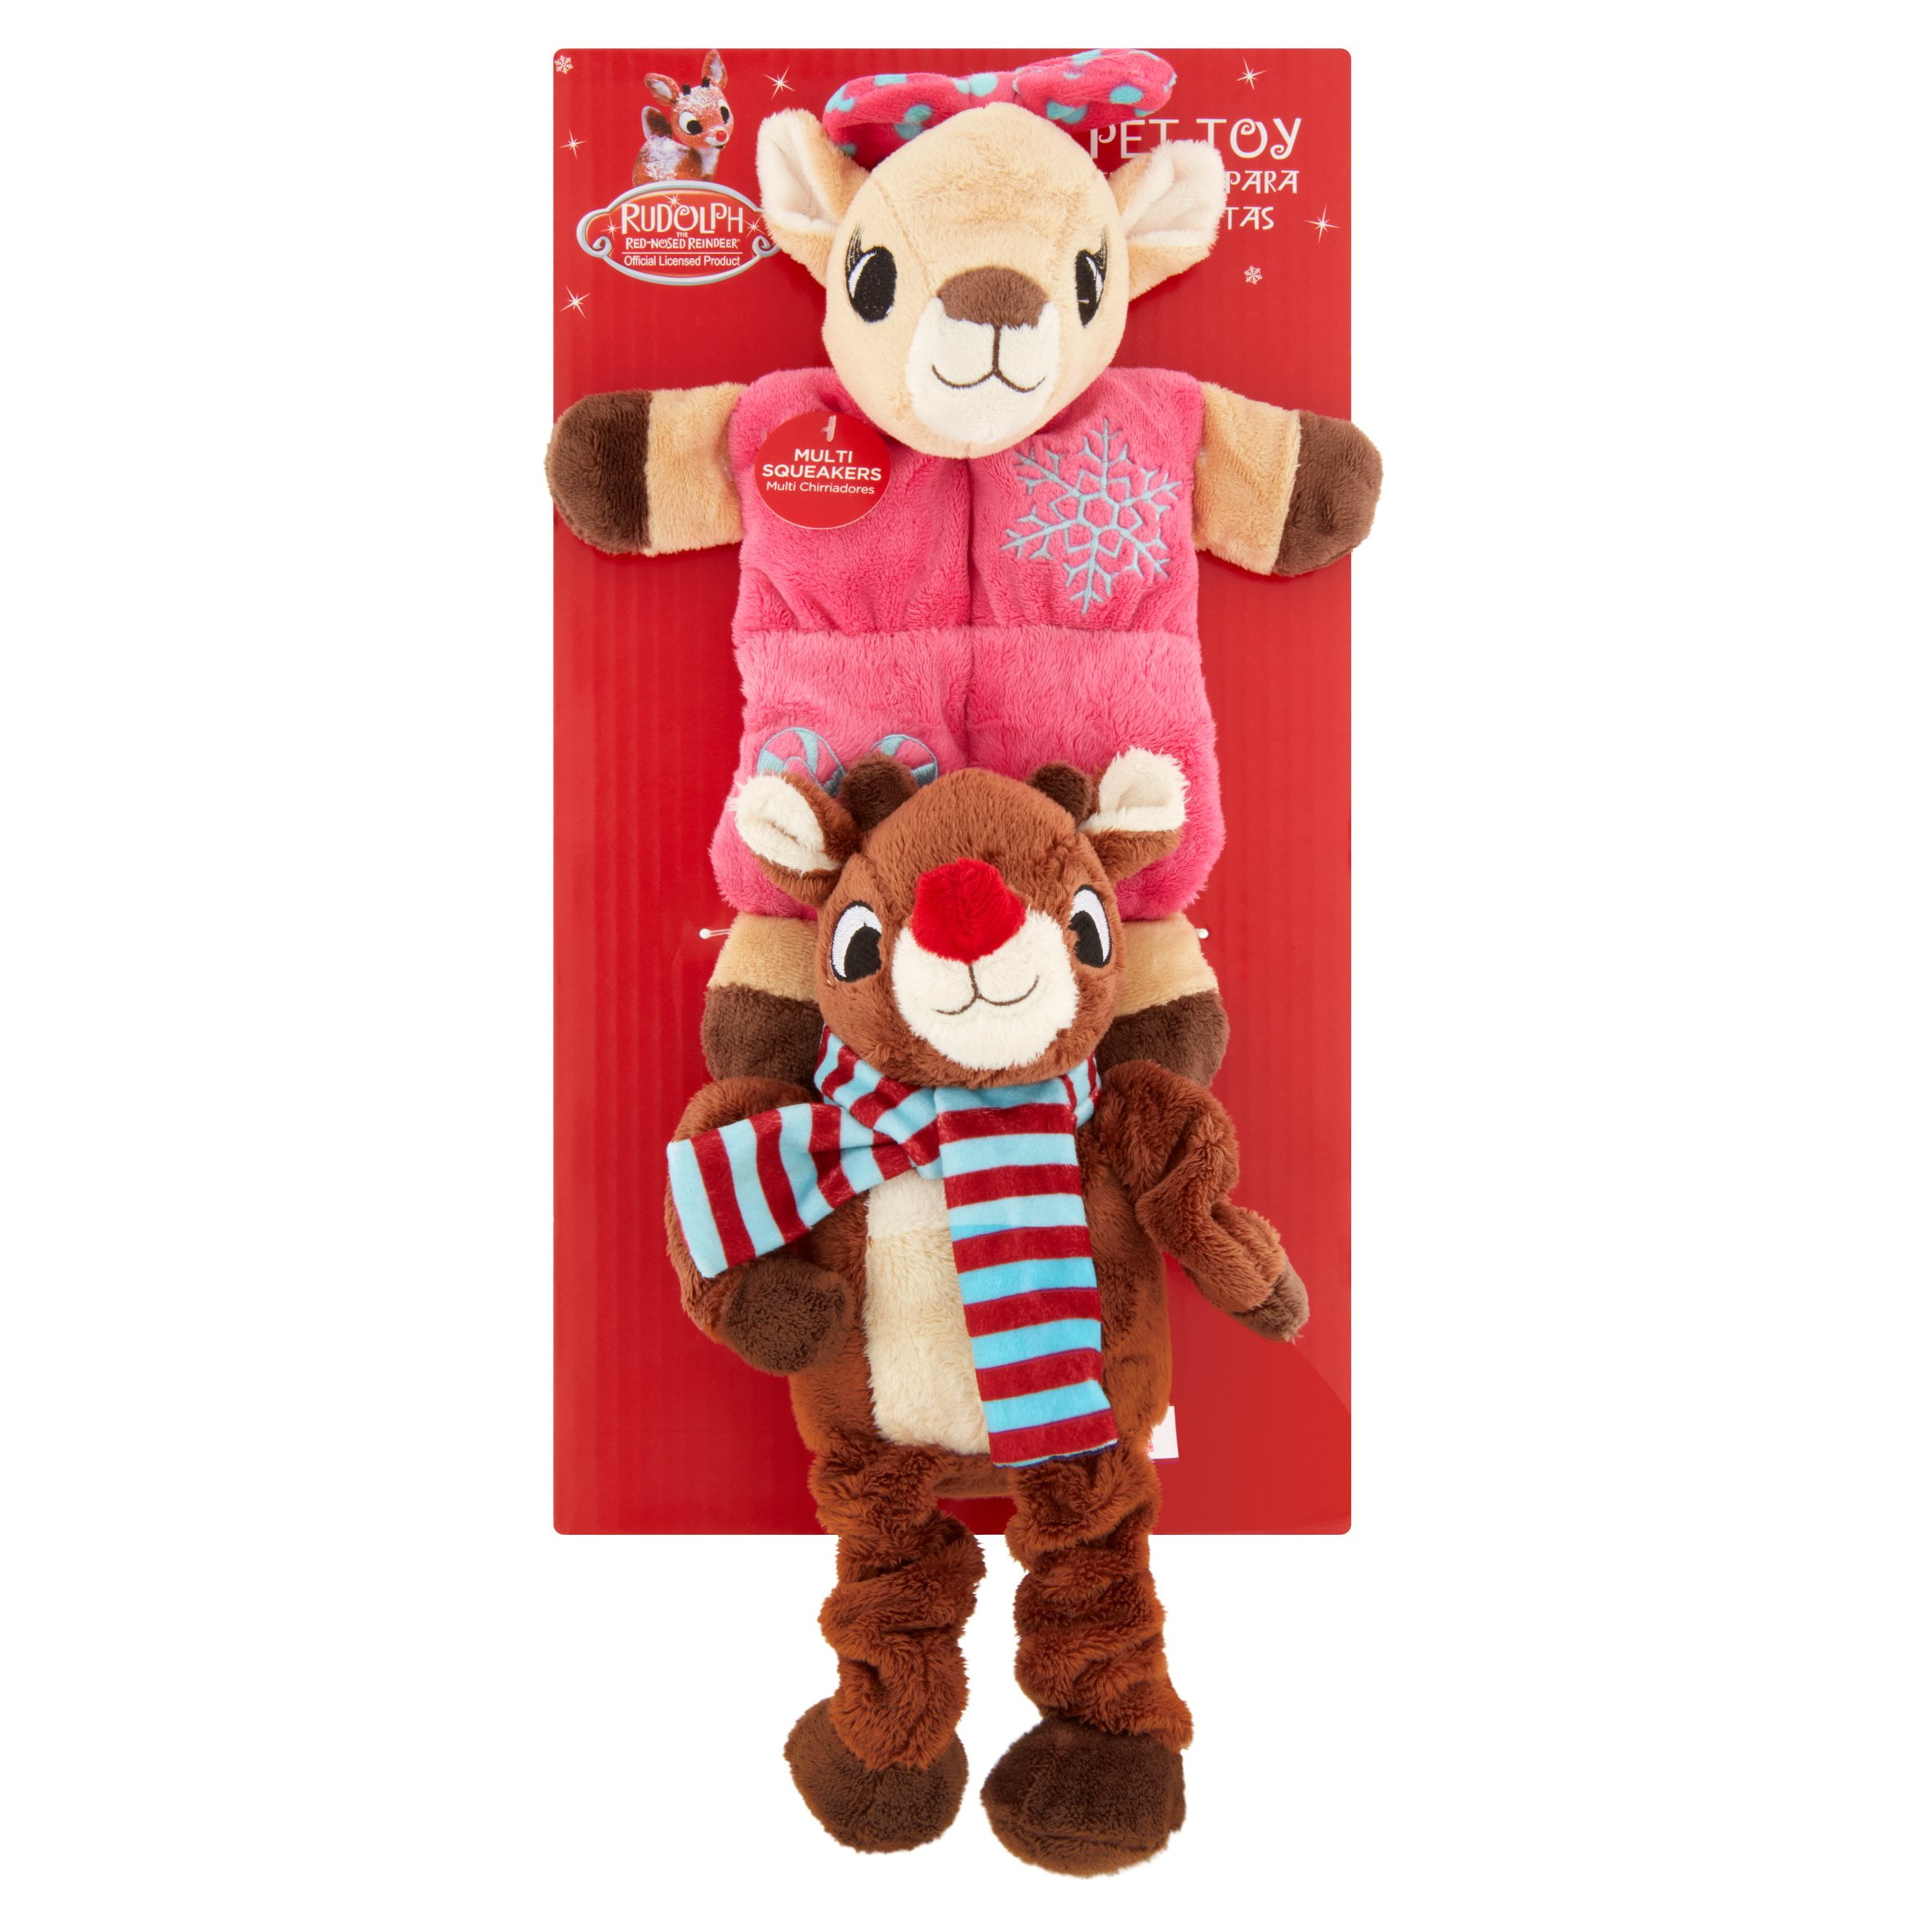 Rudolph The Red-Nosed Reindeer Pet Toy 